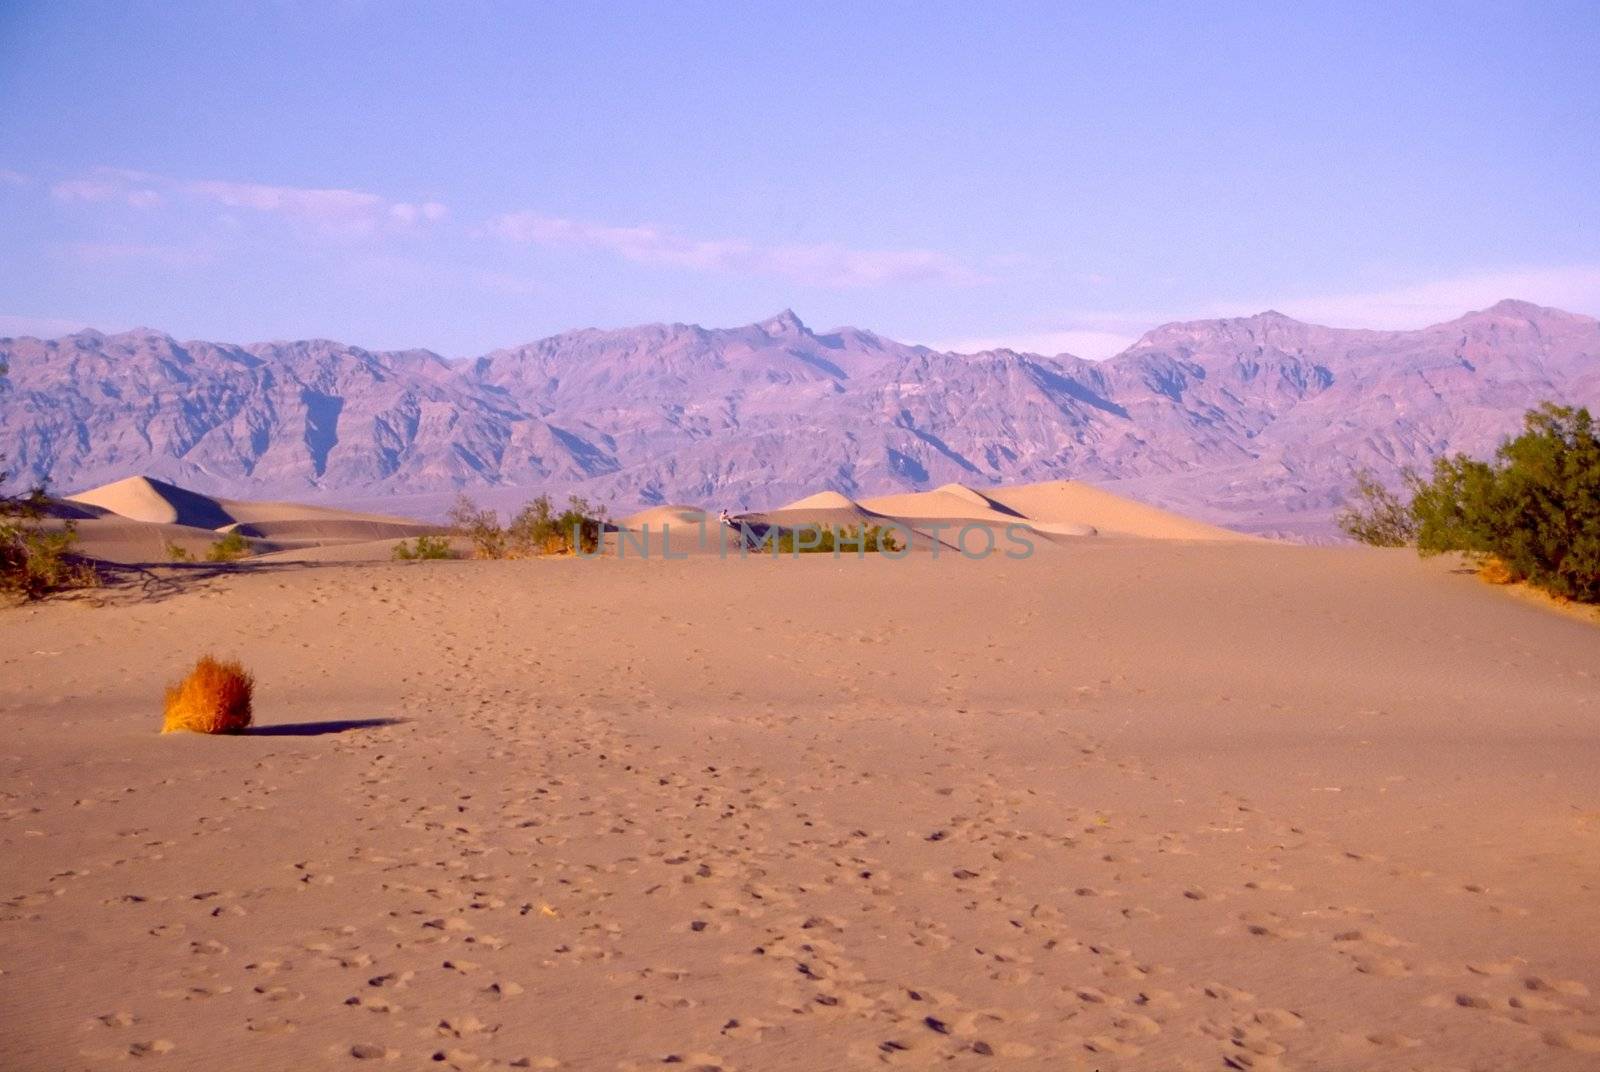 Death Valley is the lowest, driest and hottest valley in the United states. It is the location of the lowest elevation in Western hemisphere